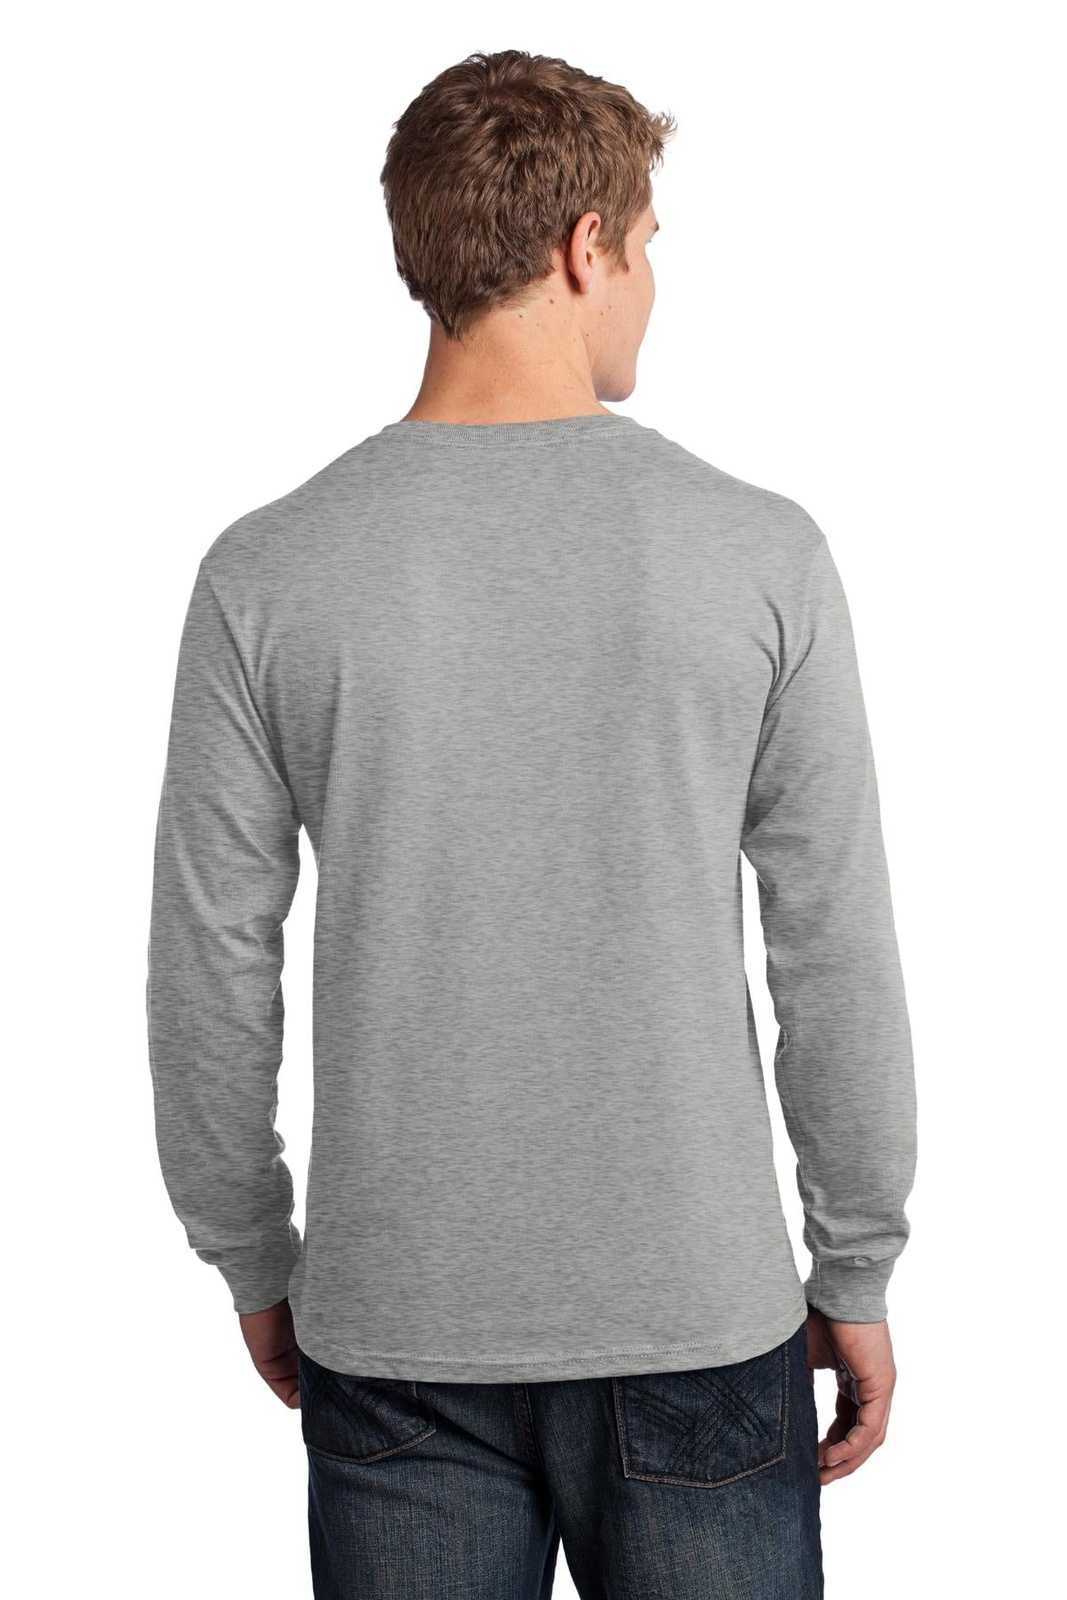 Port & Company PC54LS Long Sleeve Core Cotton Tee - Athletic Heather - HIT a Double - 1